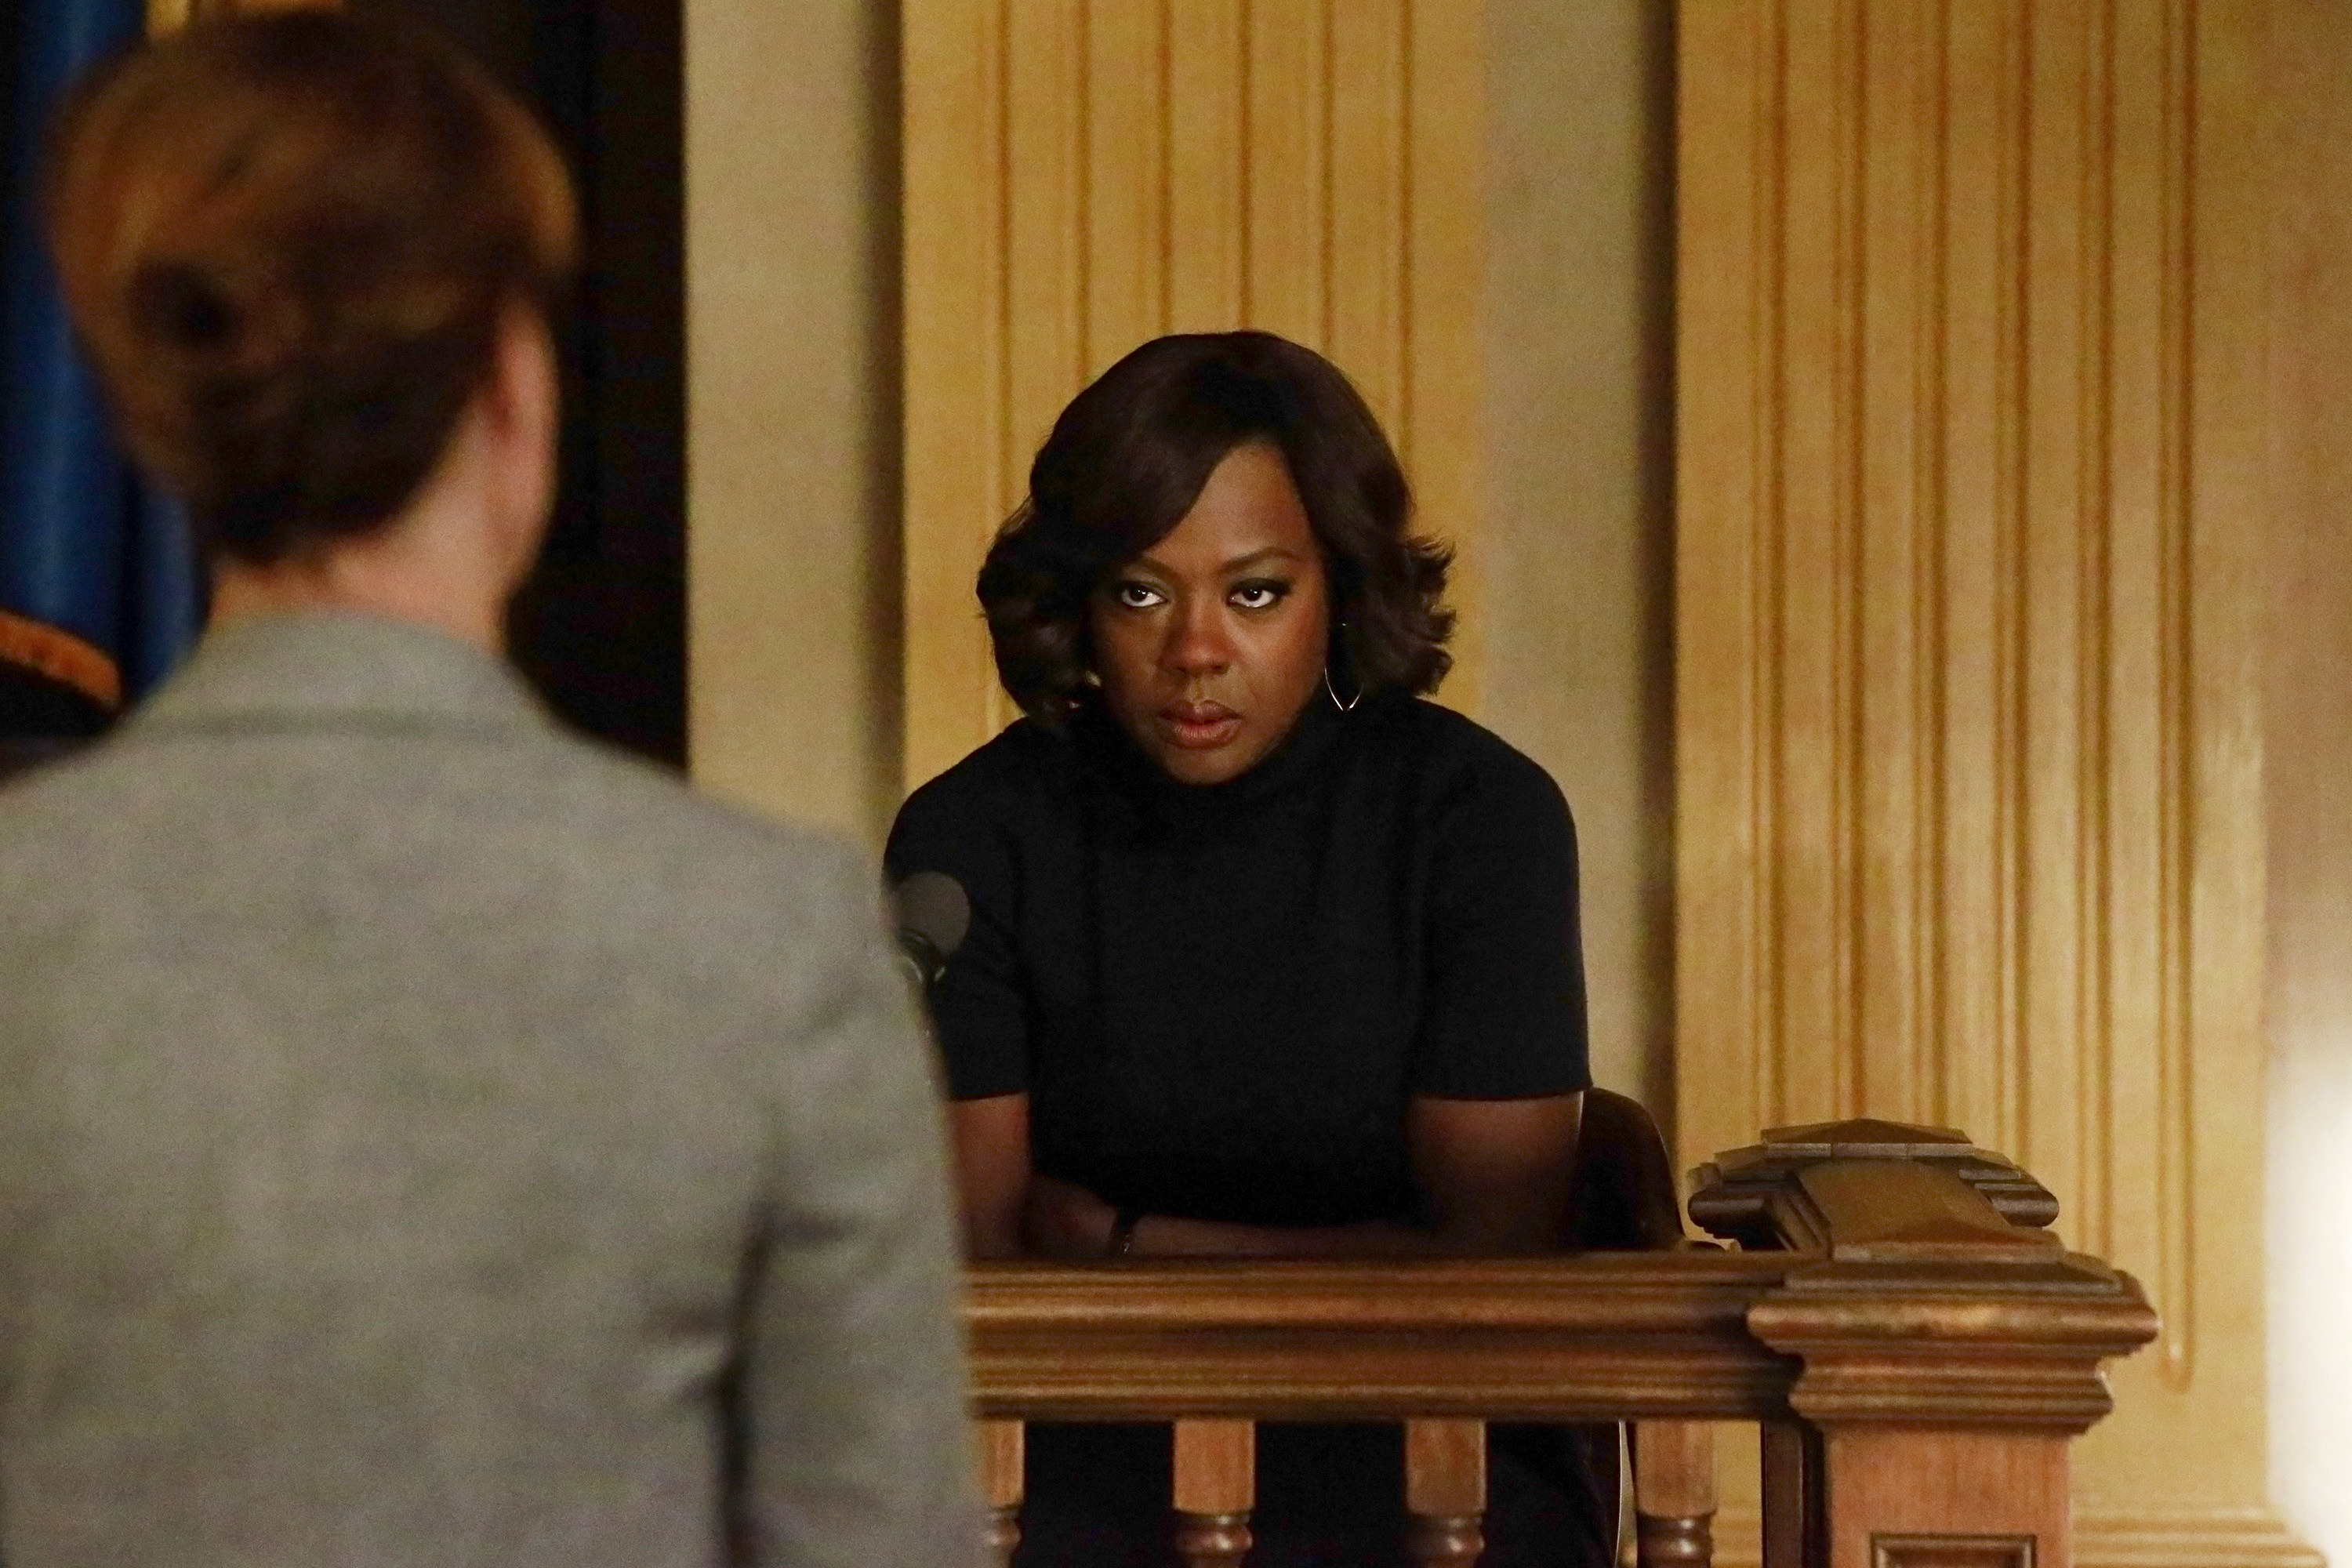 Viola in a court scene from HTGAWM